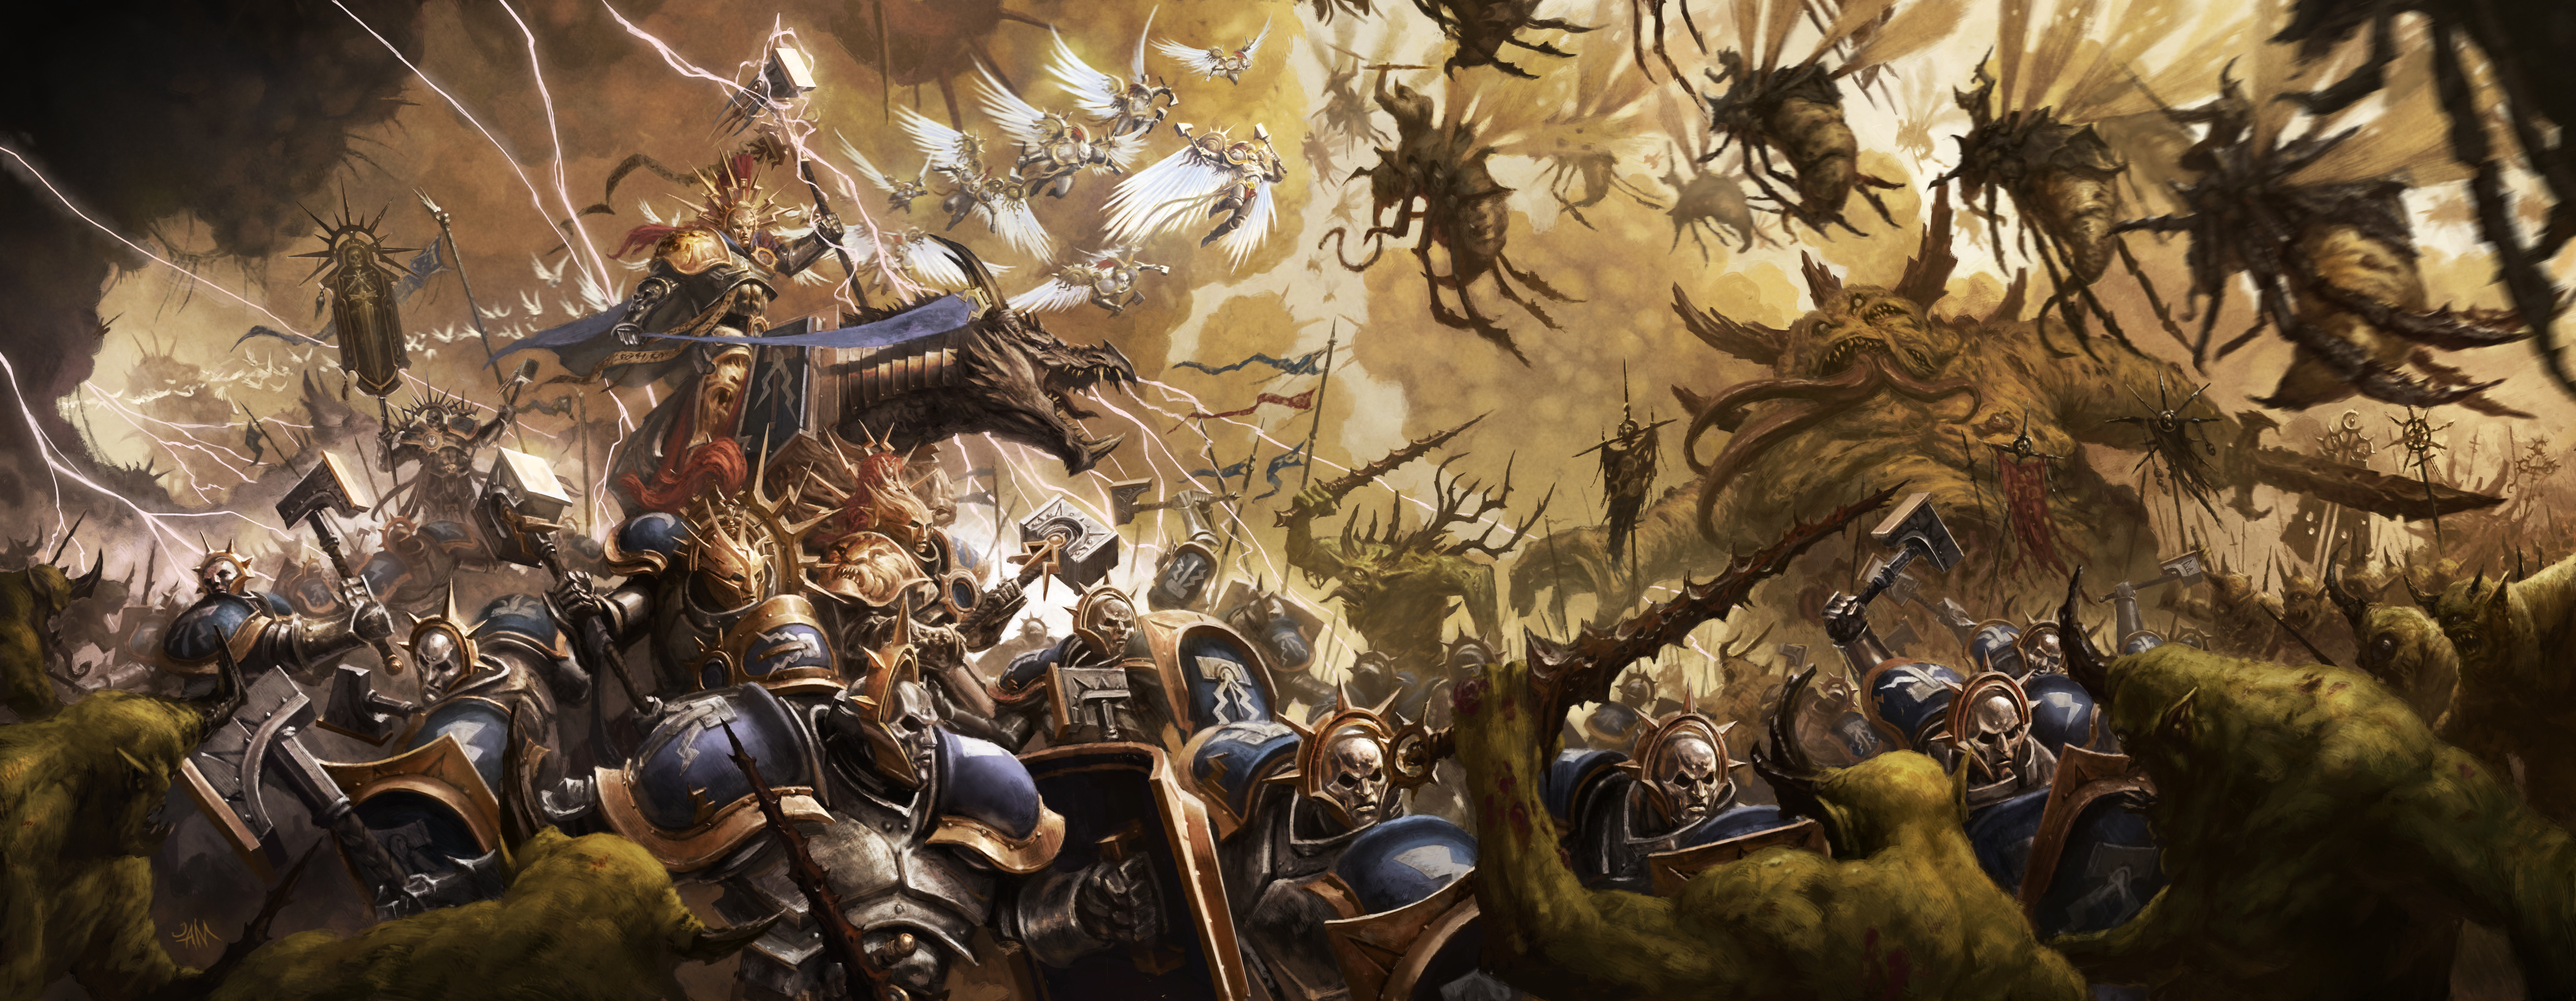 Age Of Sigmar Wallpapers